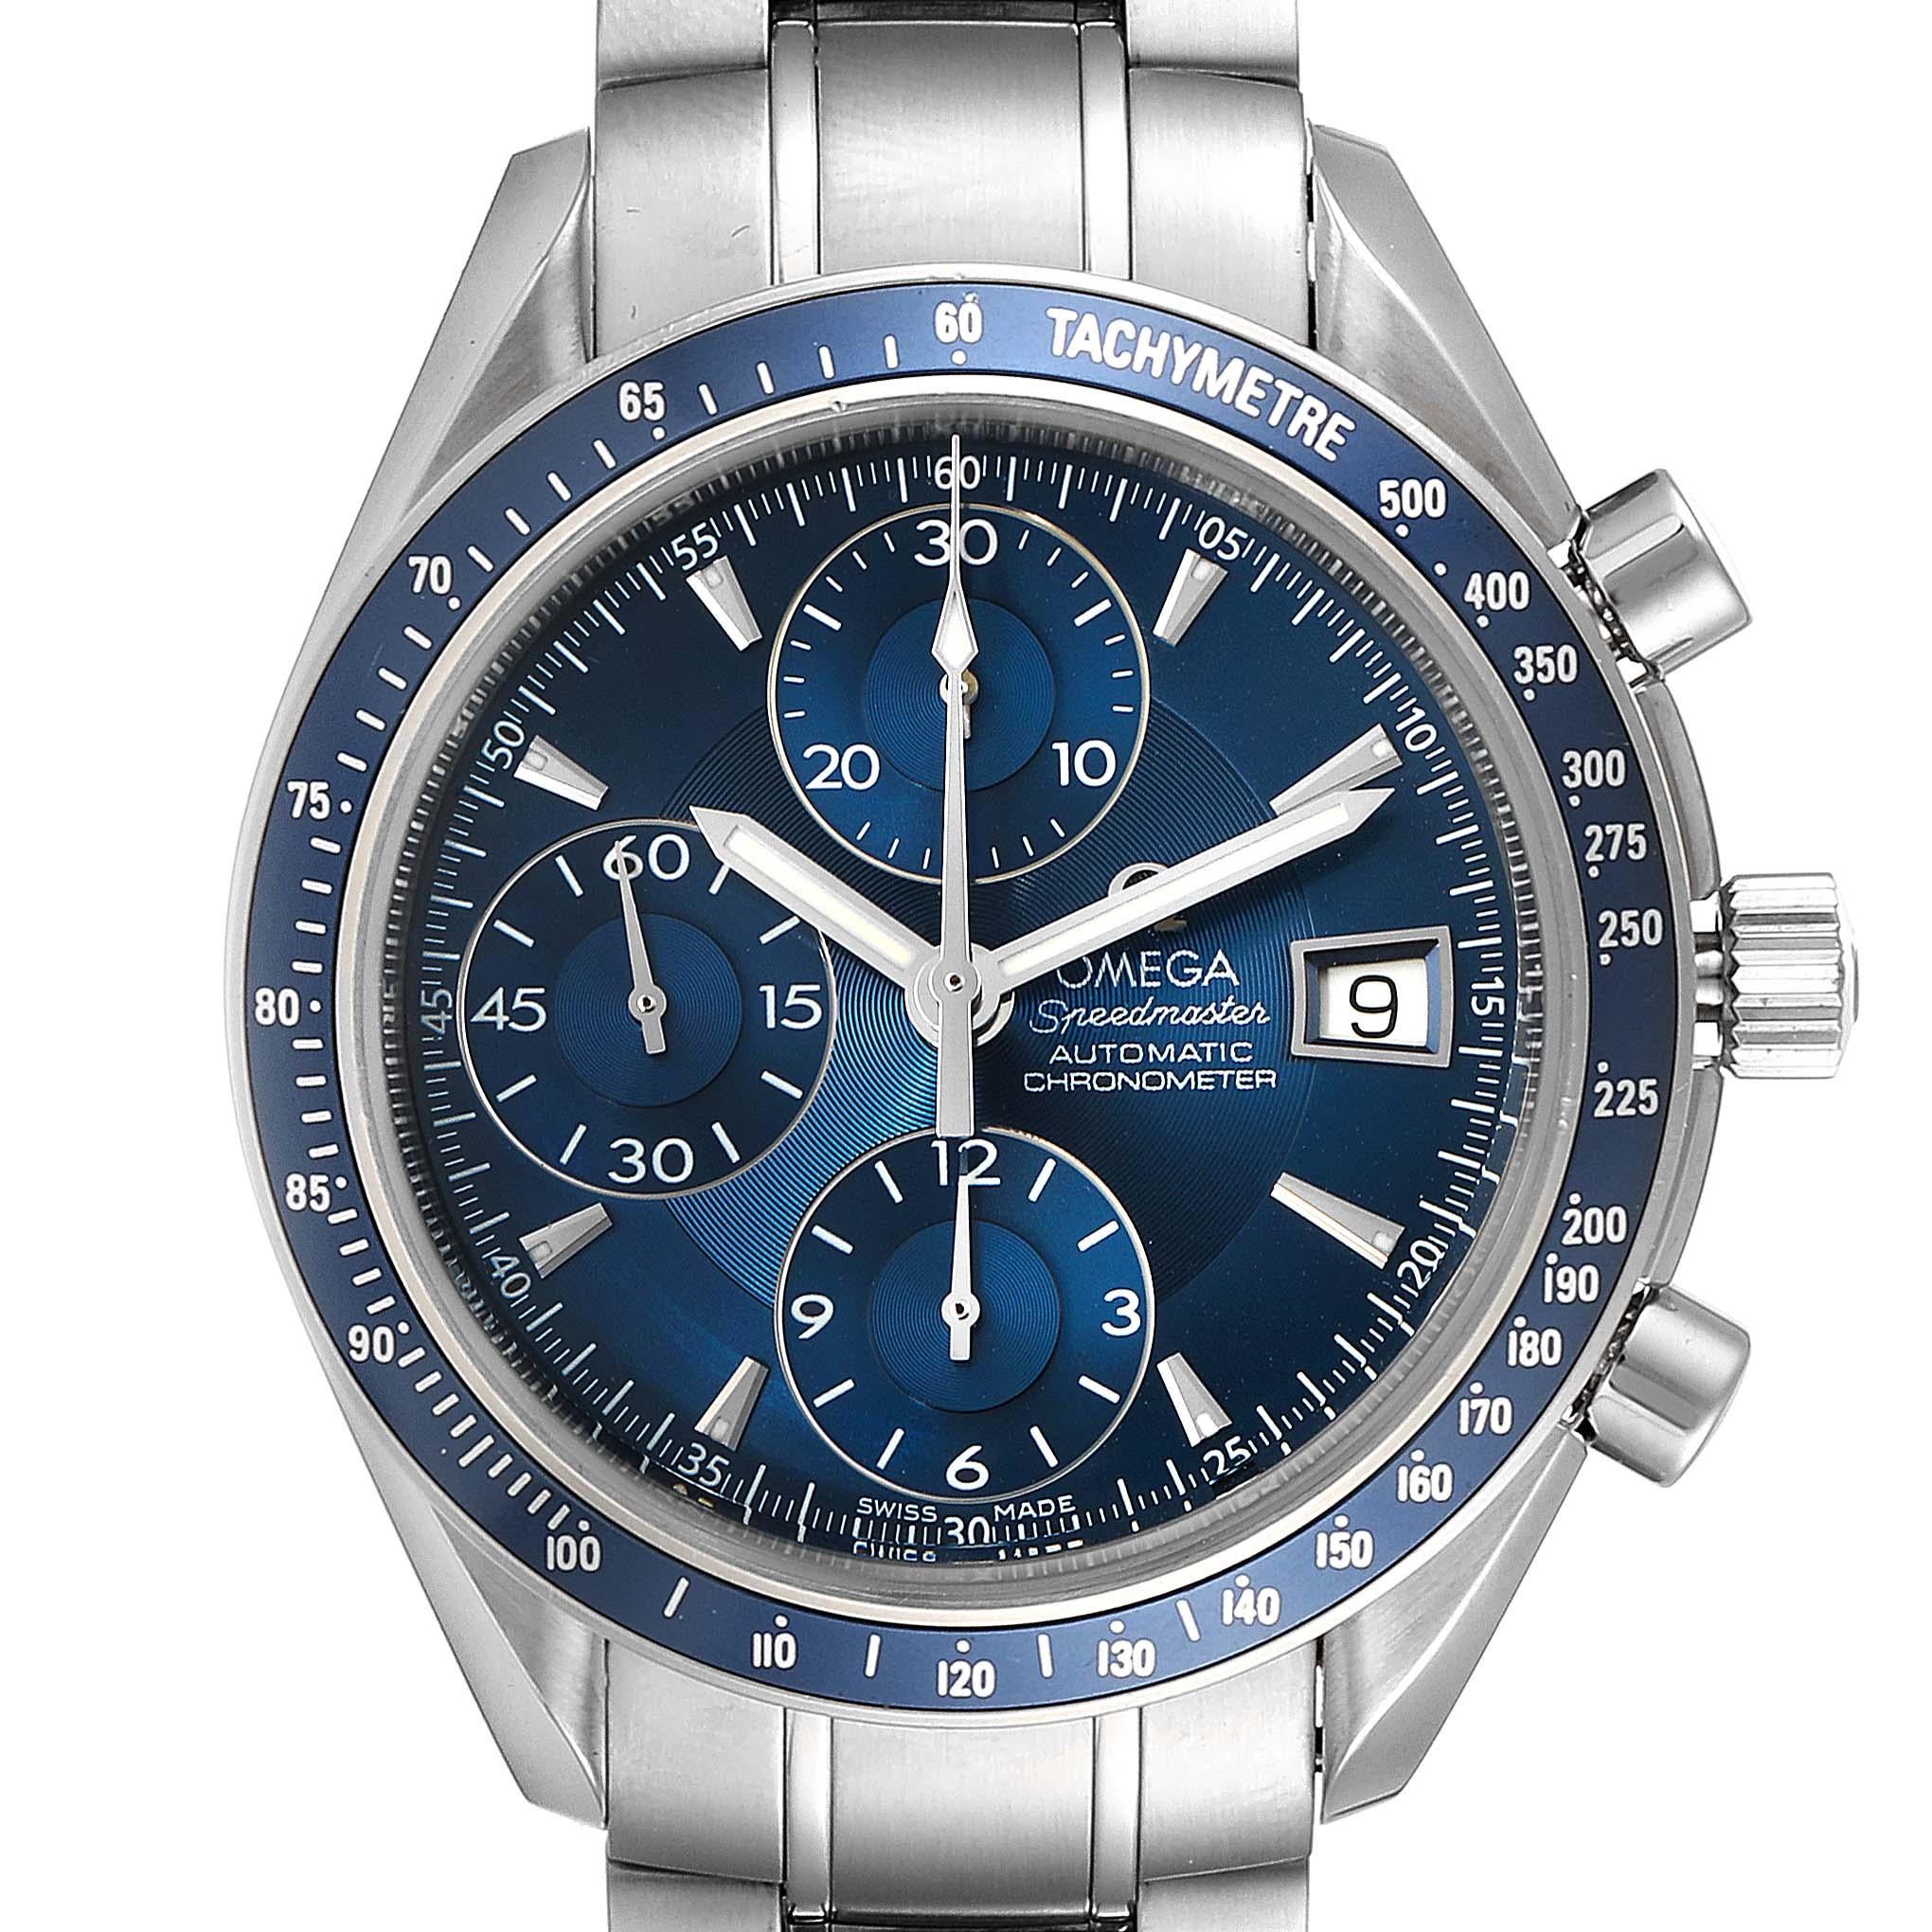 Omega Speedmaster Date Blue Dial Chronograph Mens Watch 3212.80.00. Automatic self-winding chronograph movement. Officially certified chronometer. Stainless steel round case 40.0 mm in diameter. Blue bezel with tachymetric scale. Scratch-resistant